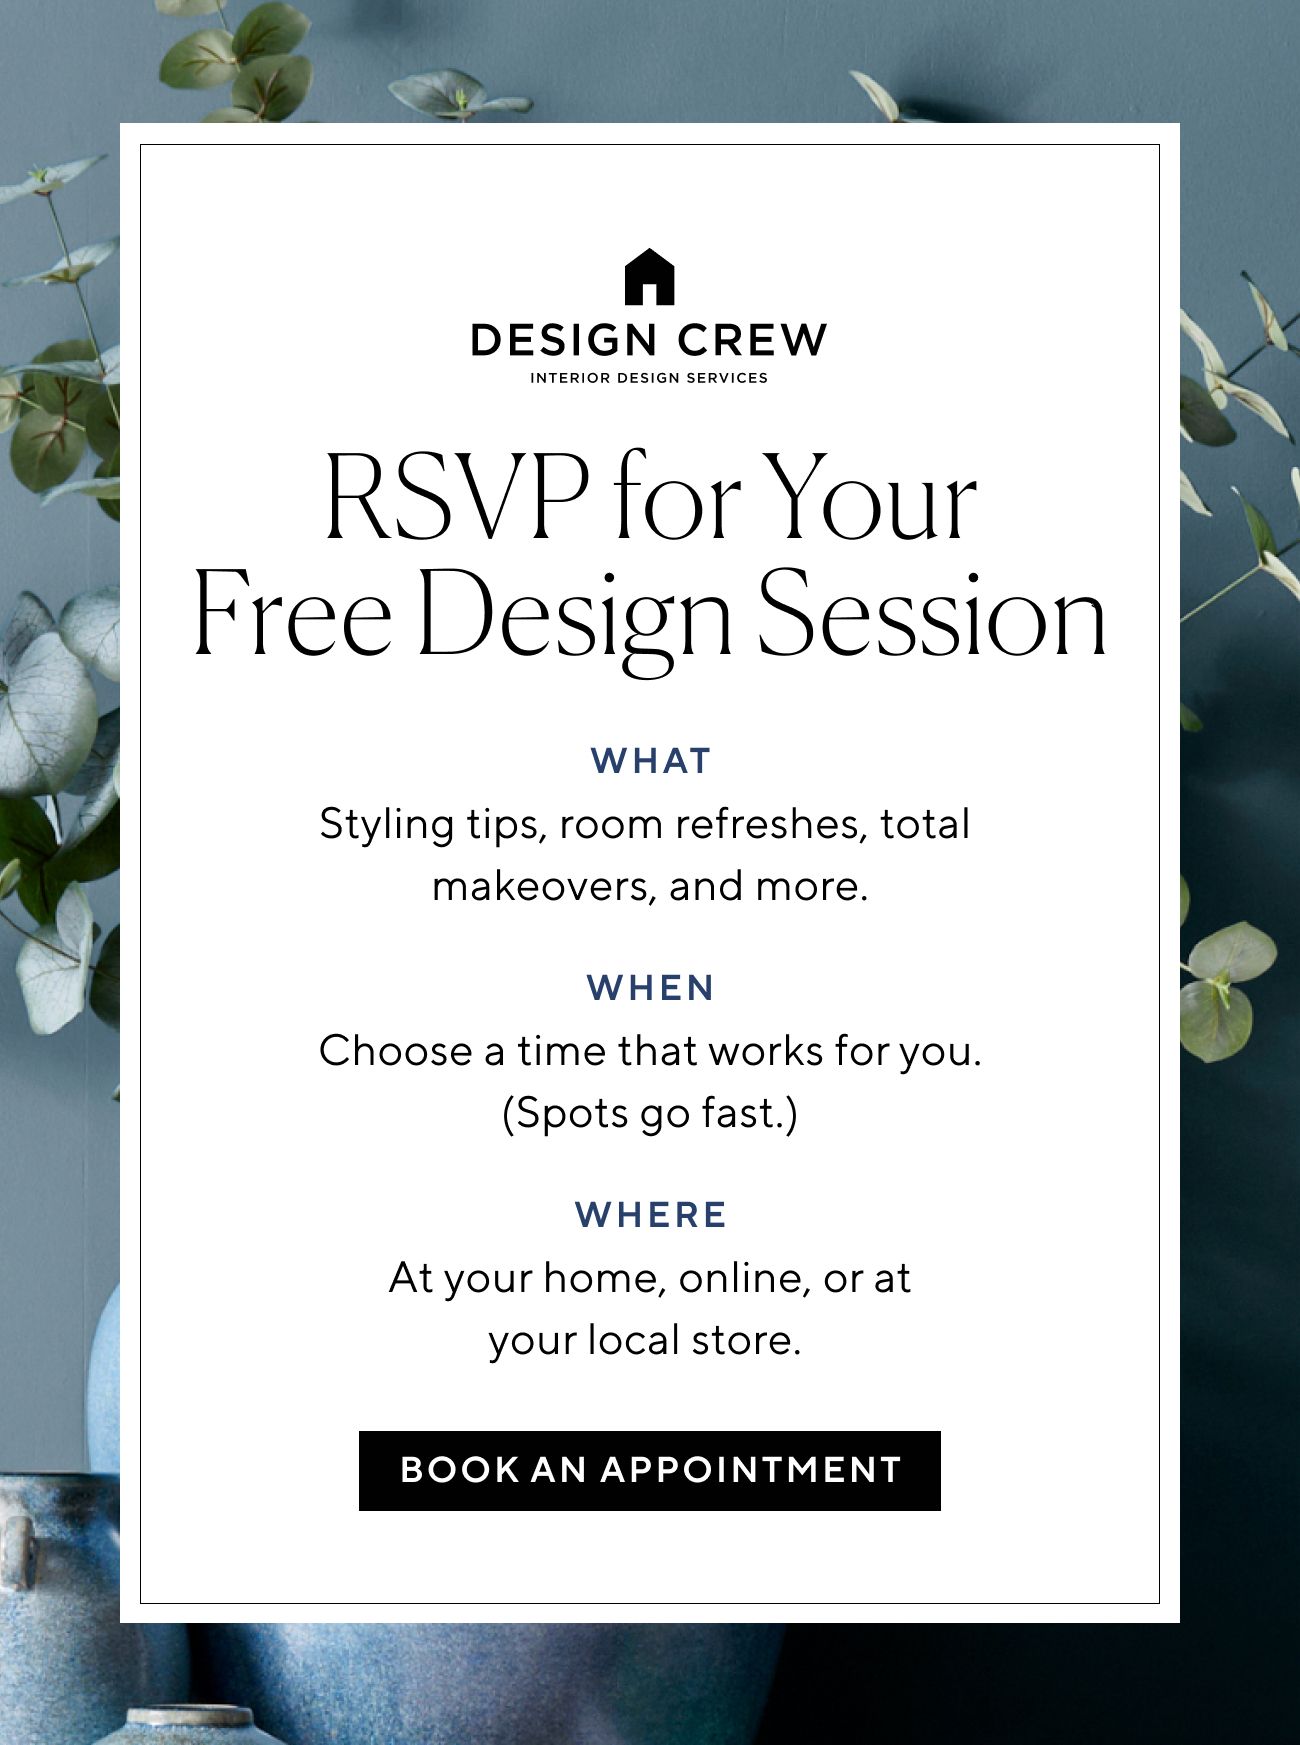  RSVP for Your Free Design Session WHAT Styling tips, room refreshes, total makeovers, and more. WHEN Choose a time that works for you. Spots go fast. WHERE At your home, online, or at your local store. BOOK AN APPOINTMENT 